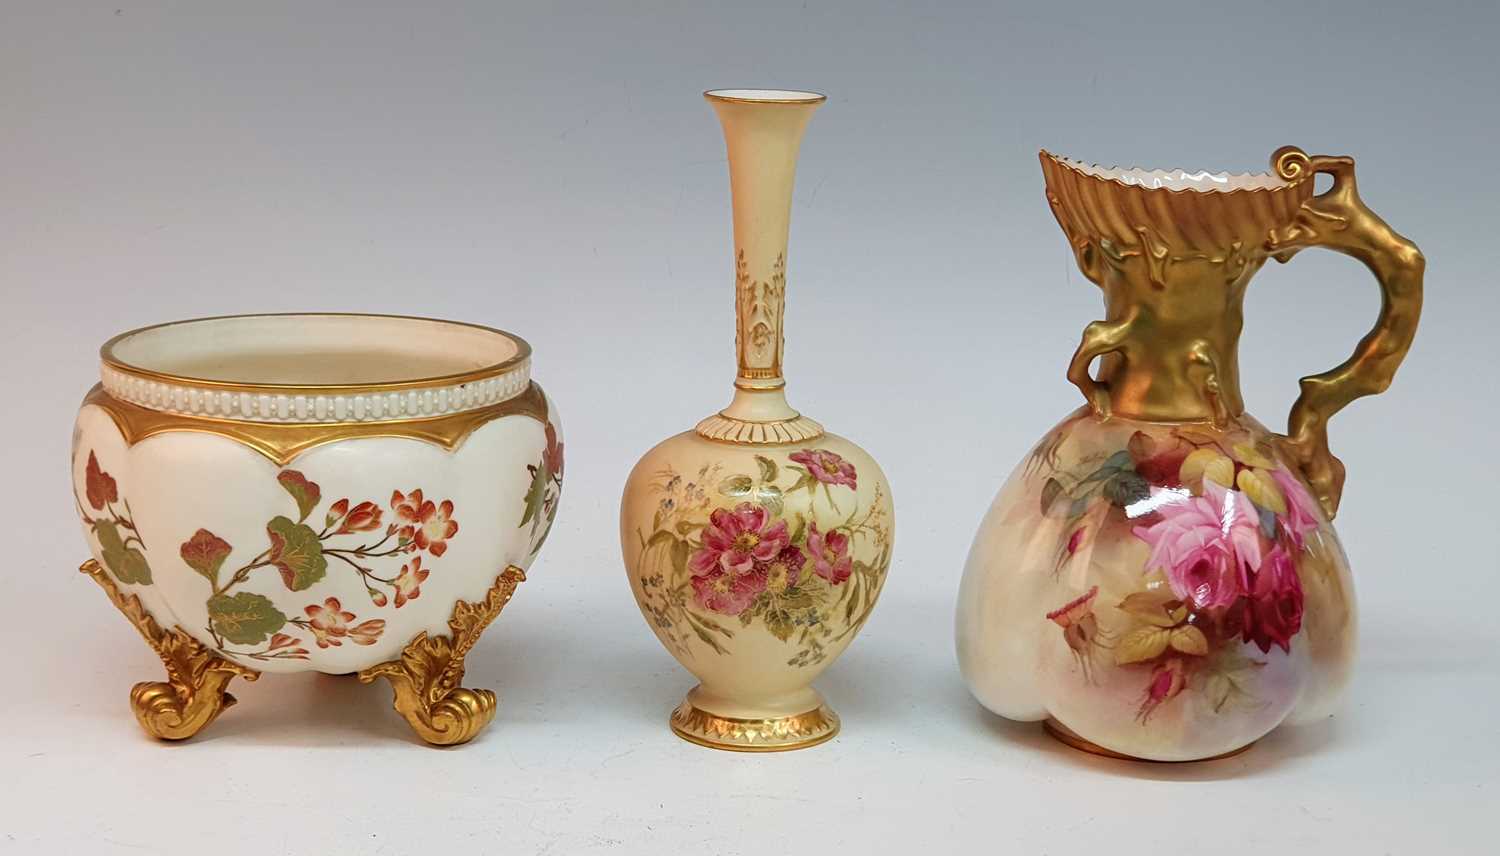 A circa 1912 Royal Worcester jug, shape 1507, decorated with roses, puce mark to the underside, h.